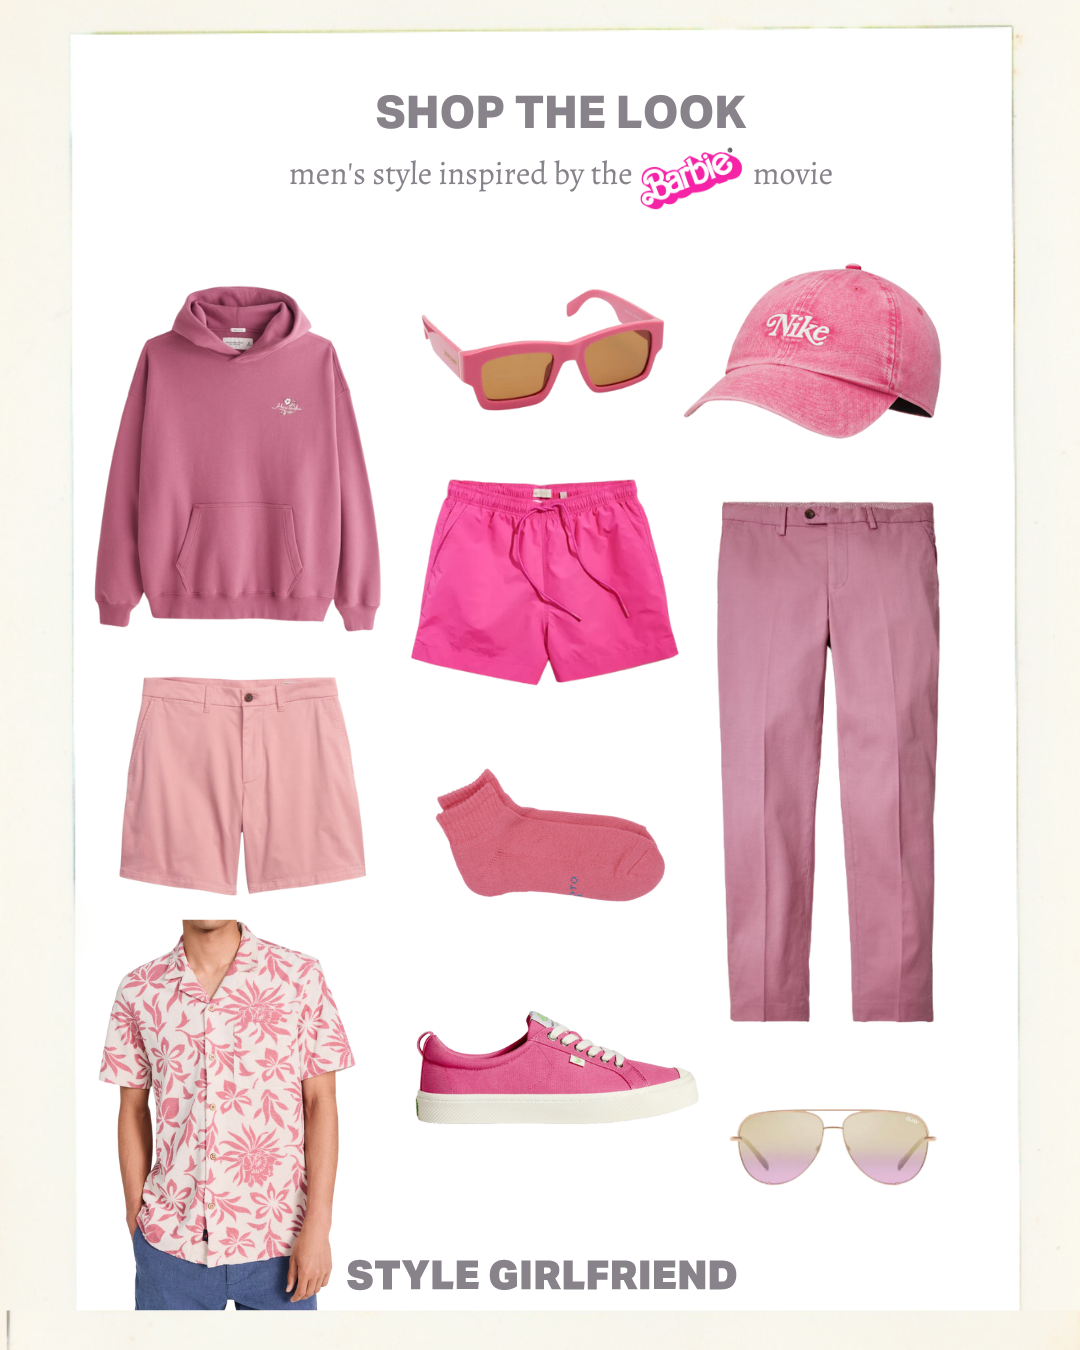 Barbie pink outfit for men